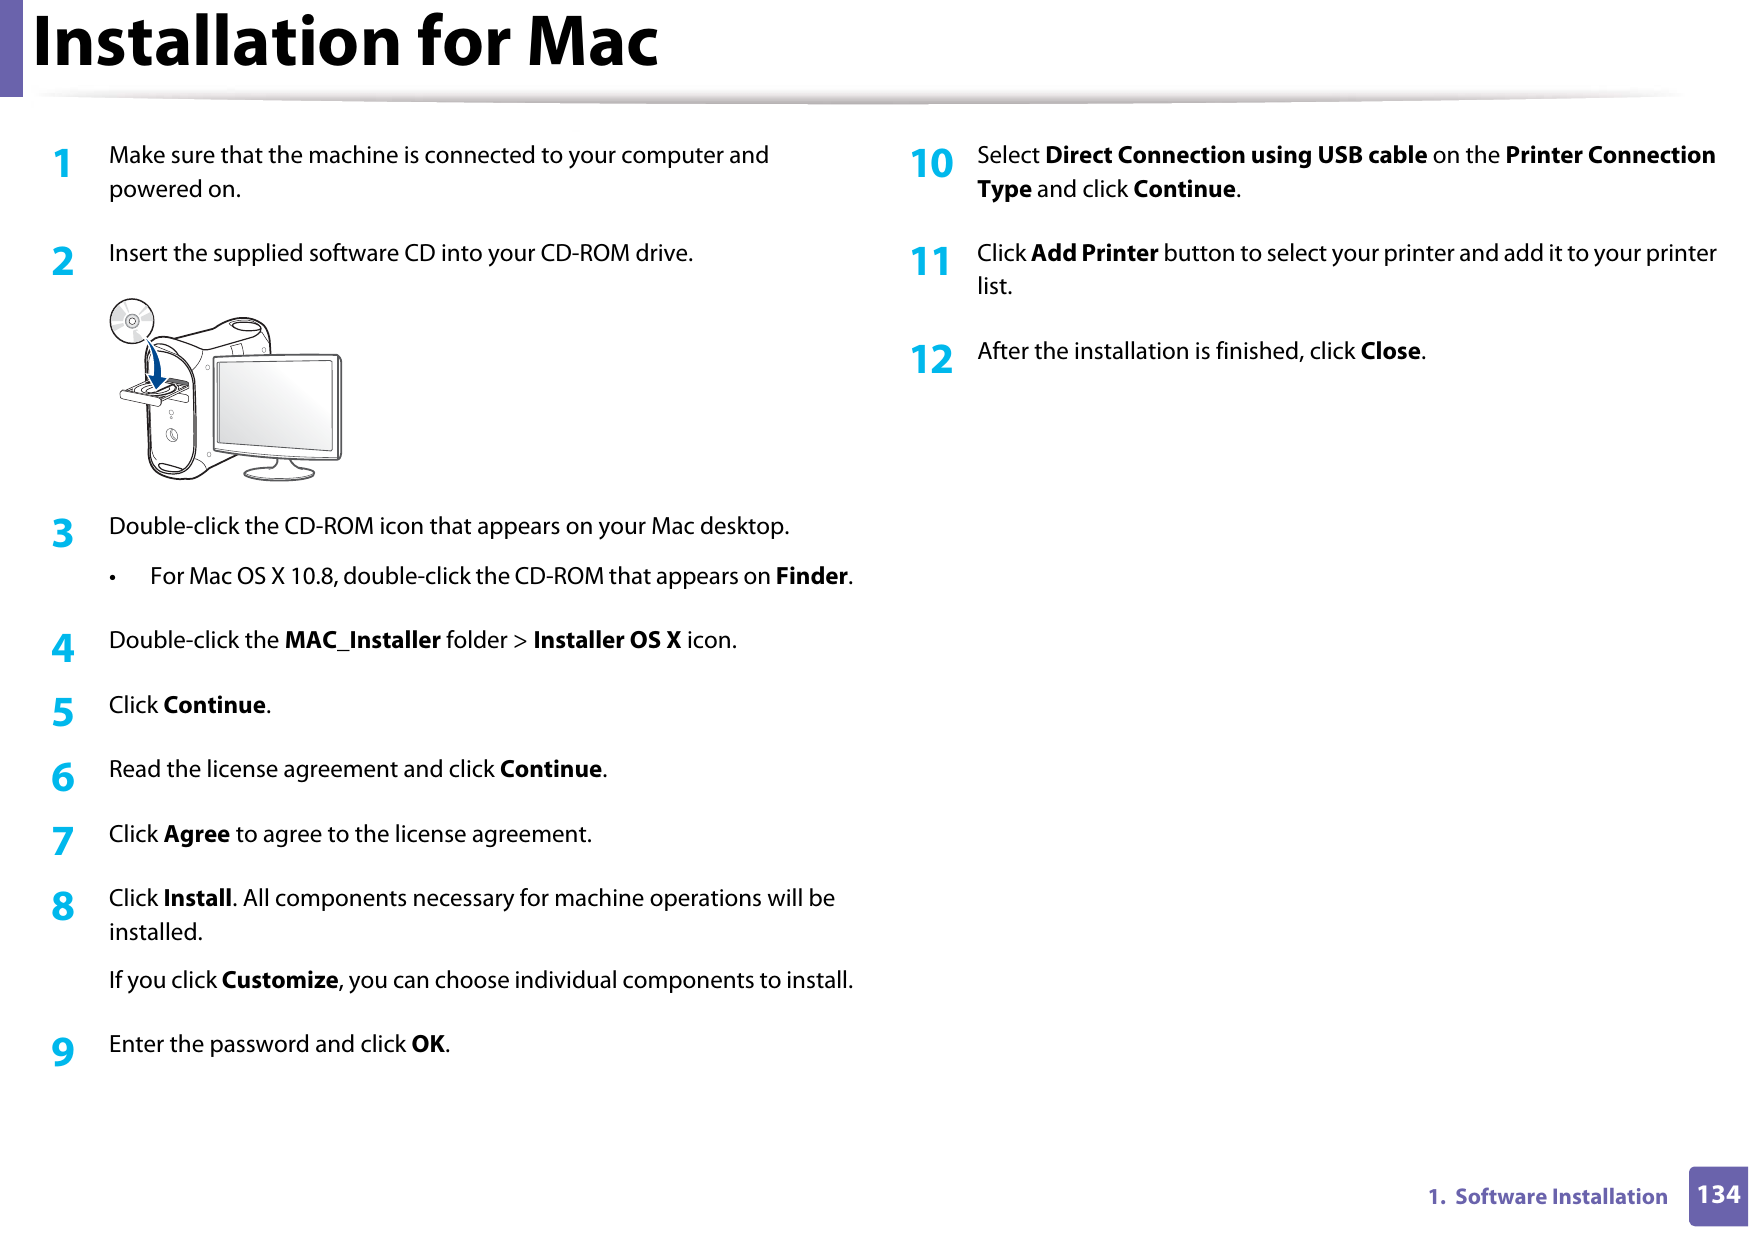 1341.  Software InstallationInstallation for Mac1Make sure that the machine is connected to your computer and powered on.2  Insert the supplied software CD into your CD-ROM drive.3  Double-click the CD-ROM icon that appears on your Mac desktop.• For Mac OS X 10.8, double-click the CD-ROM that appears on Finder.4  Double-click the MAC_Installer folder &gt; Installer OS X icon.5  Click Continue.6  Read the license agreement and click Continue.7  Click Agree to agree to the license agreement.8  Click Install. All components necessary for machine operations will be installed.If you click Customize, you can choose individual components to install.9  Enter the password and click OK.10  Select Direct Connection using USB cable on the Printer Connection Type and click Continue.11  Click Add Printer button to select your printer and add it to your printer list.12  After the installation is finished, click Close.